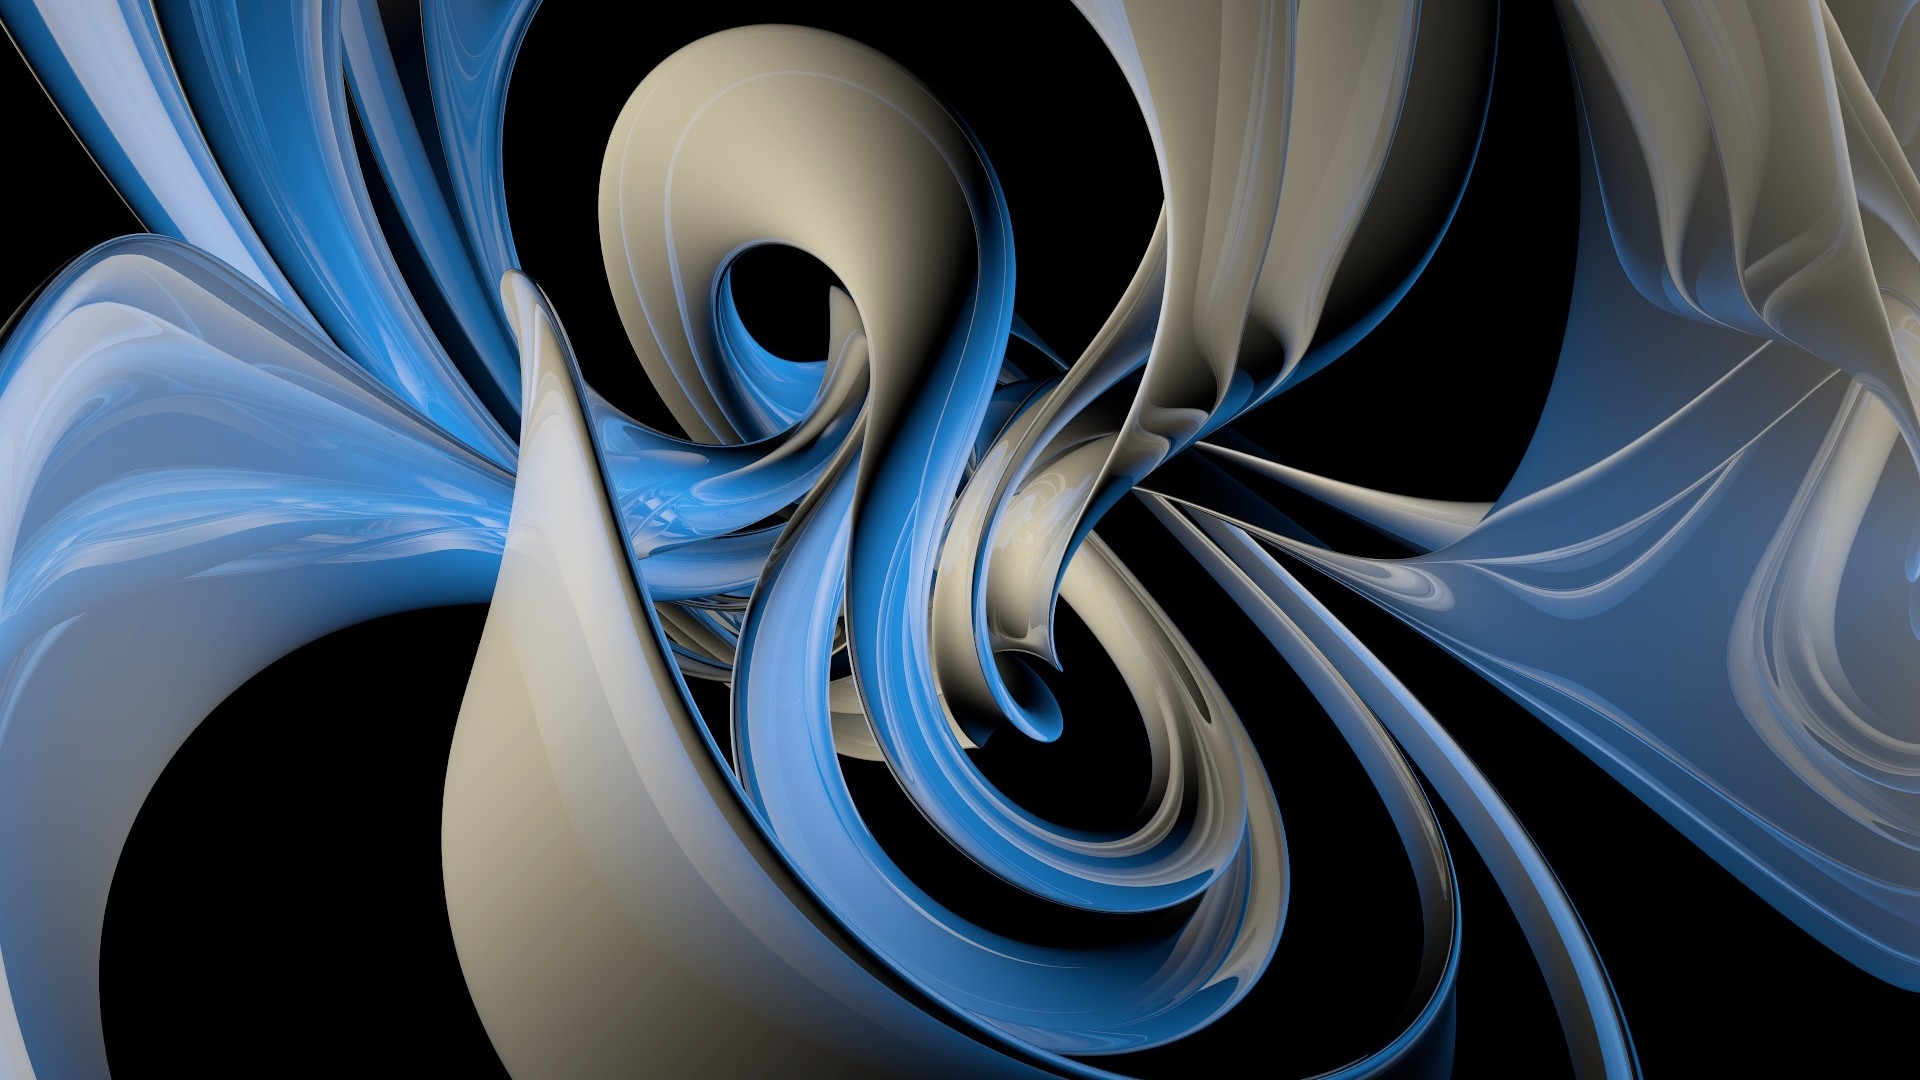 Cool Abstract Shapes 3d Wallpaper Hq